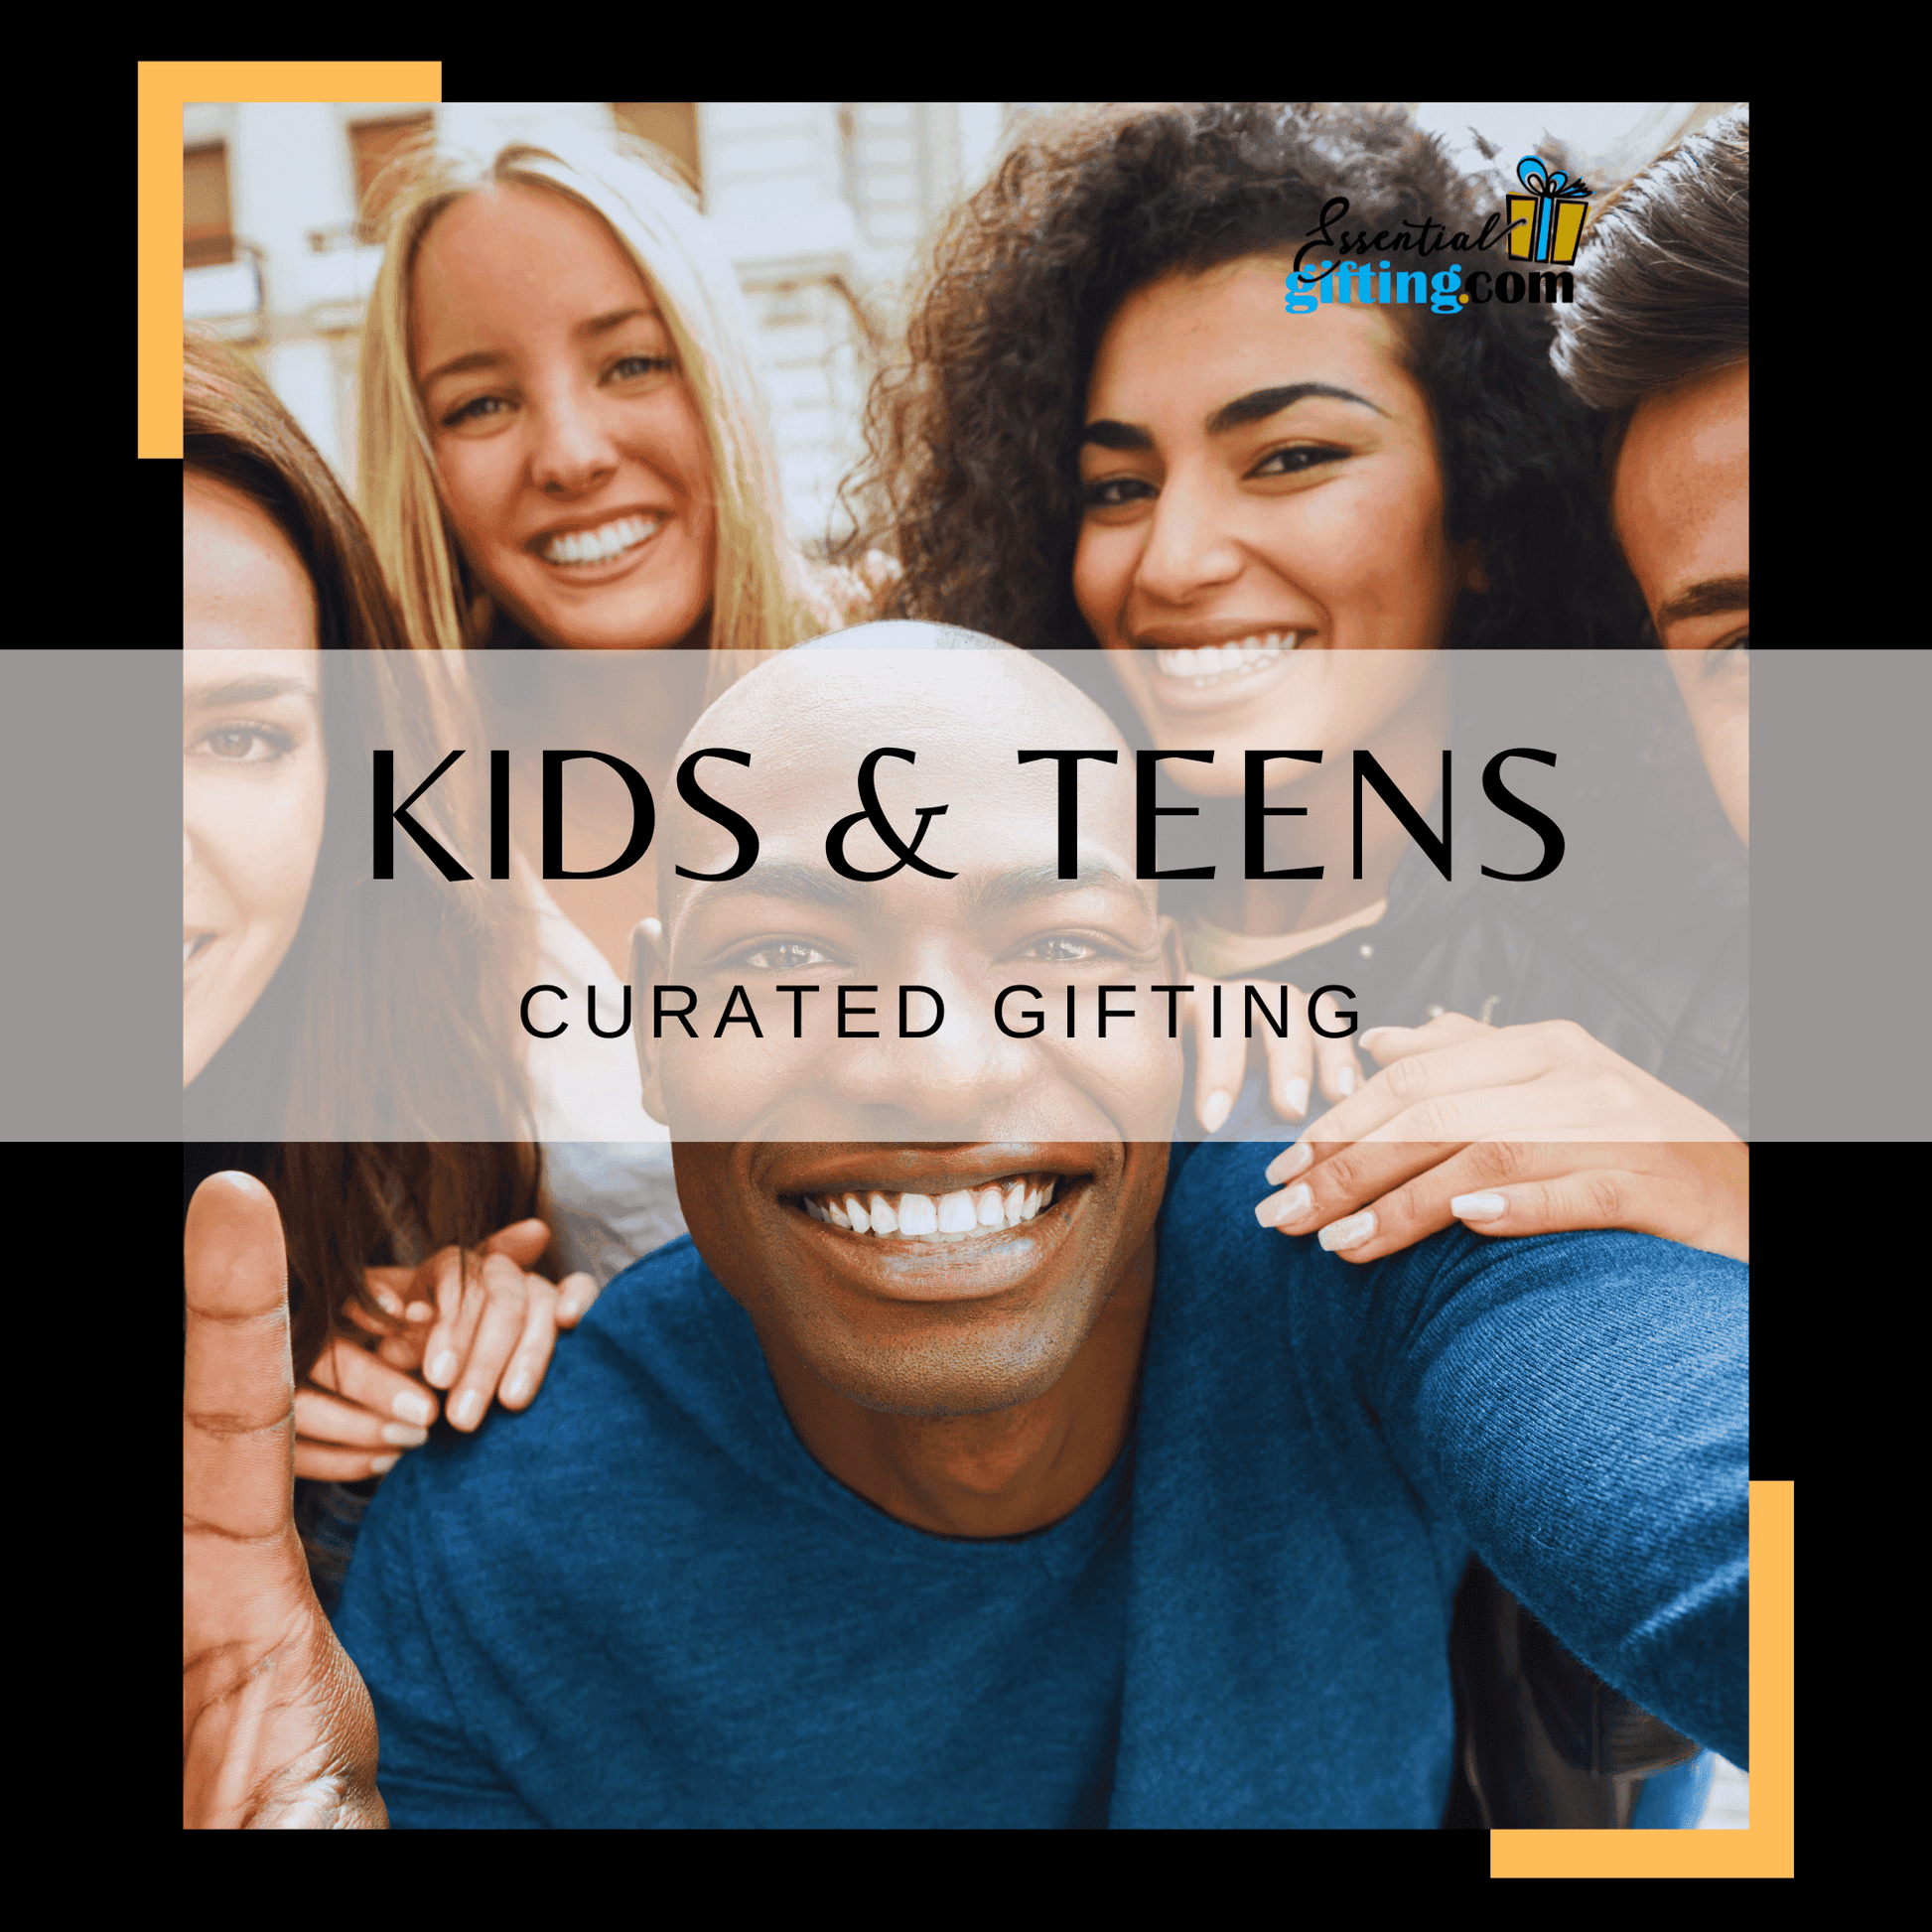 Smiling teenagers in a curated gift box for kids and teens.